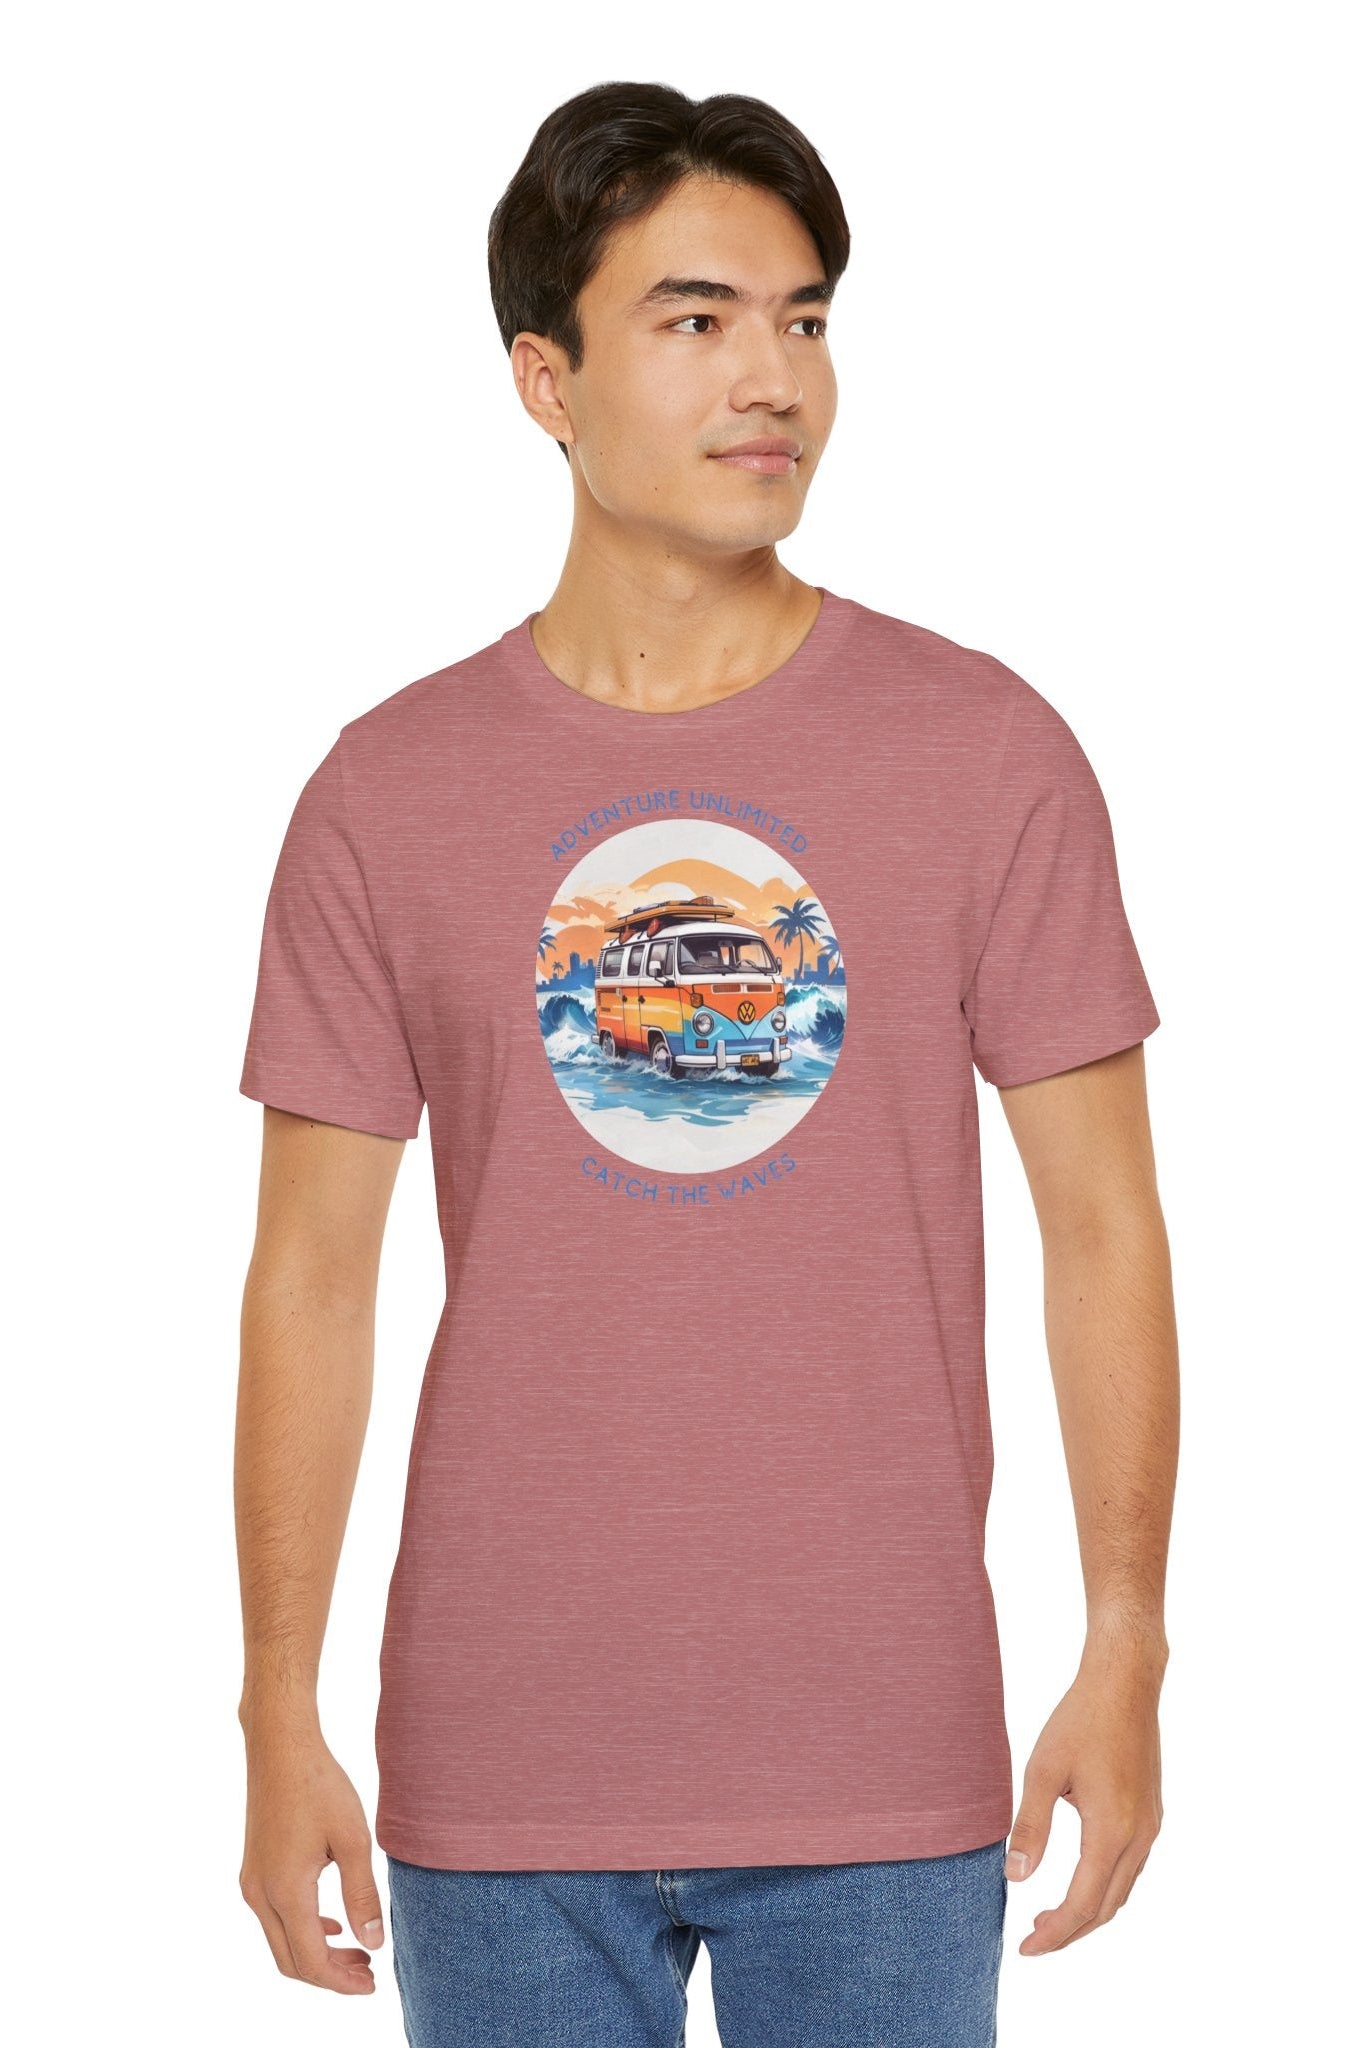 Adventure Unlimited Surfing T-Shirt - Man in Red Tee with ’Surf’ Design - Bella & Canvas EU